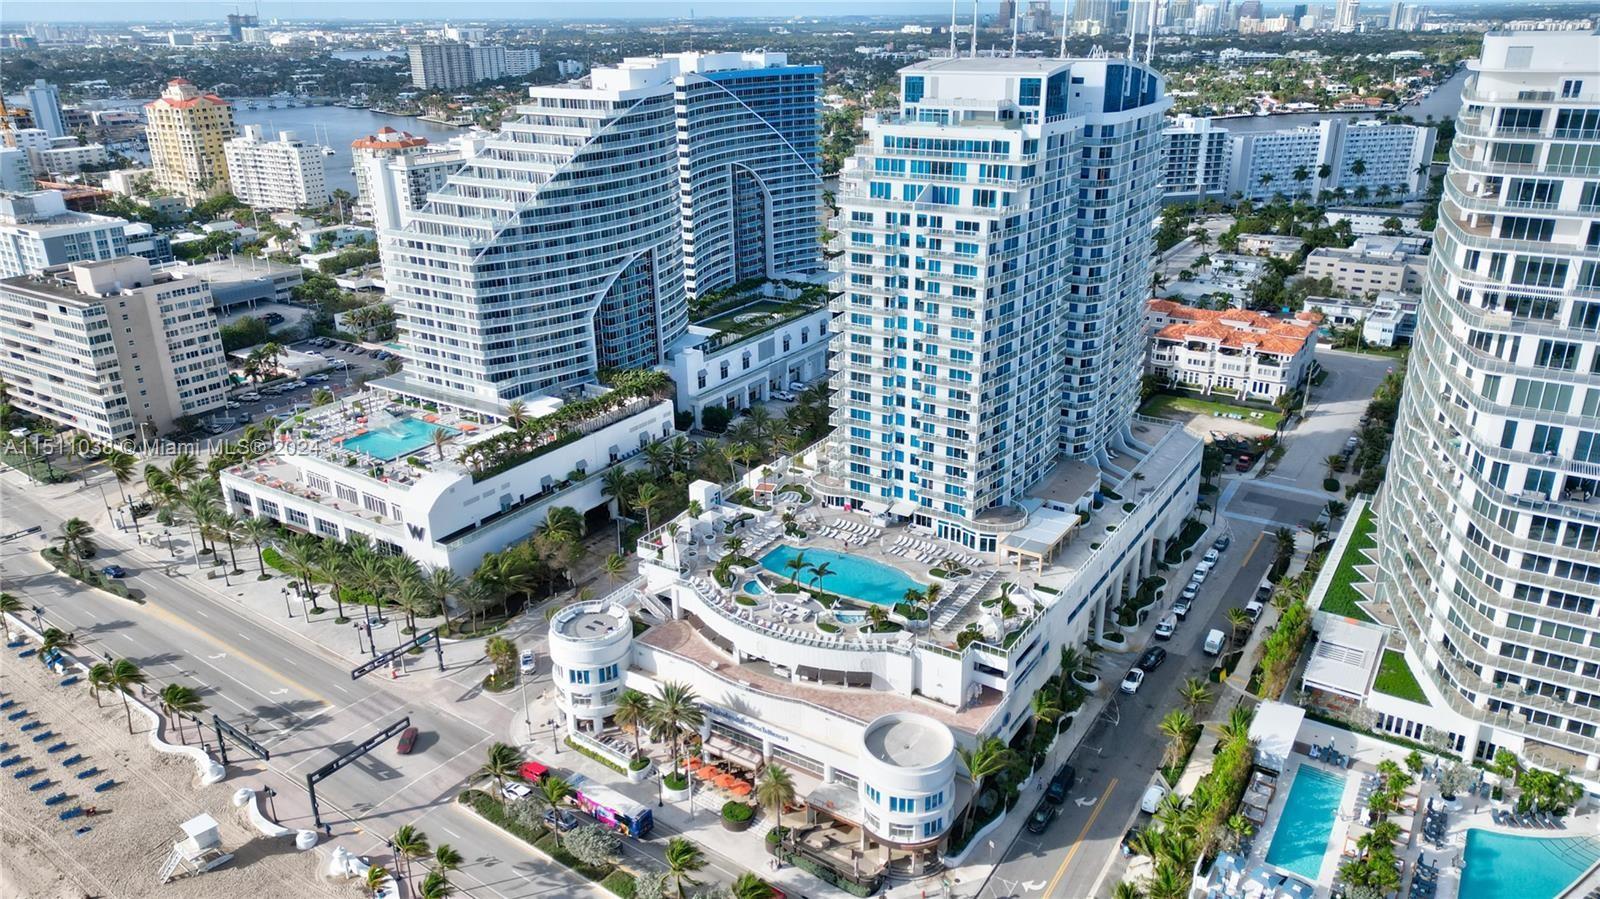 Property Image for 505 N Fort Lauderdale Beach Blvd 1010